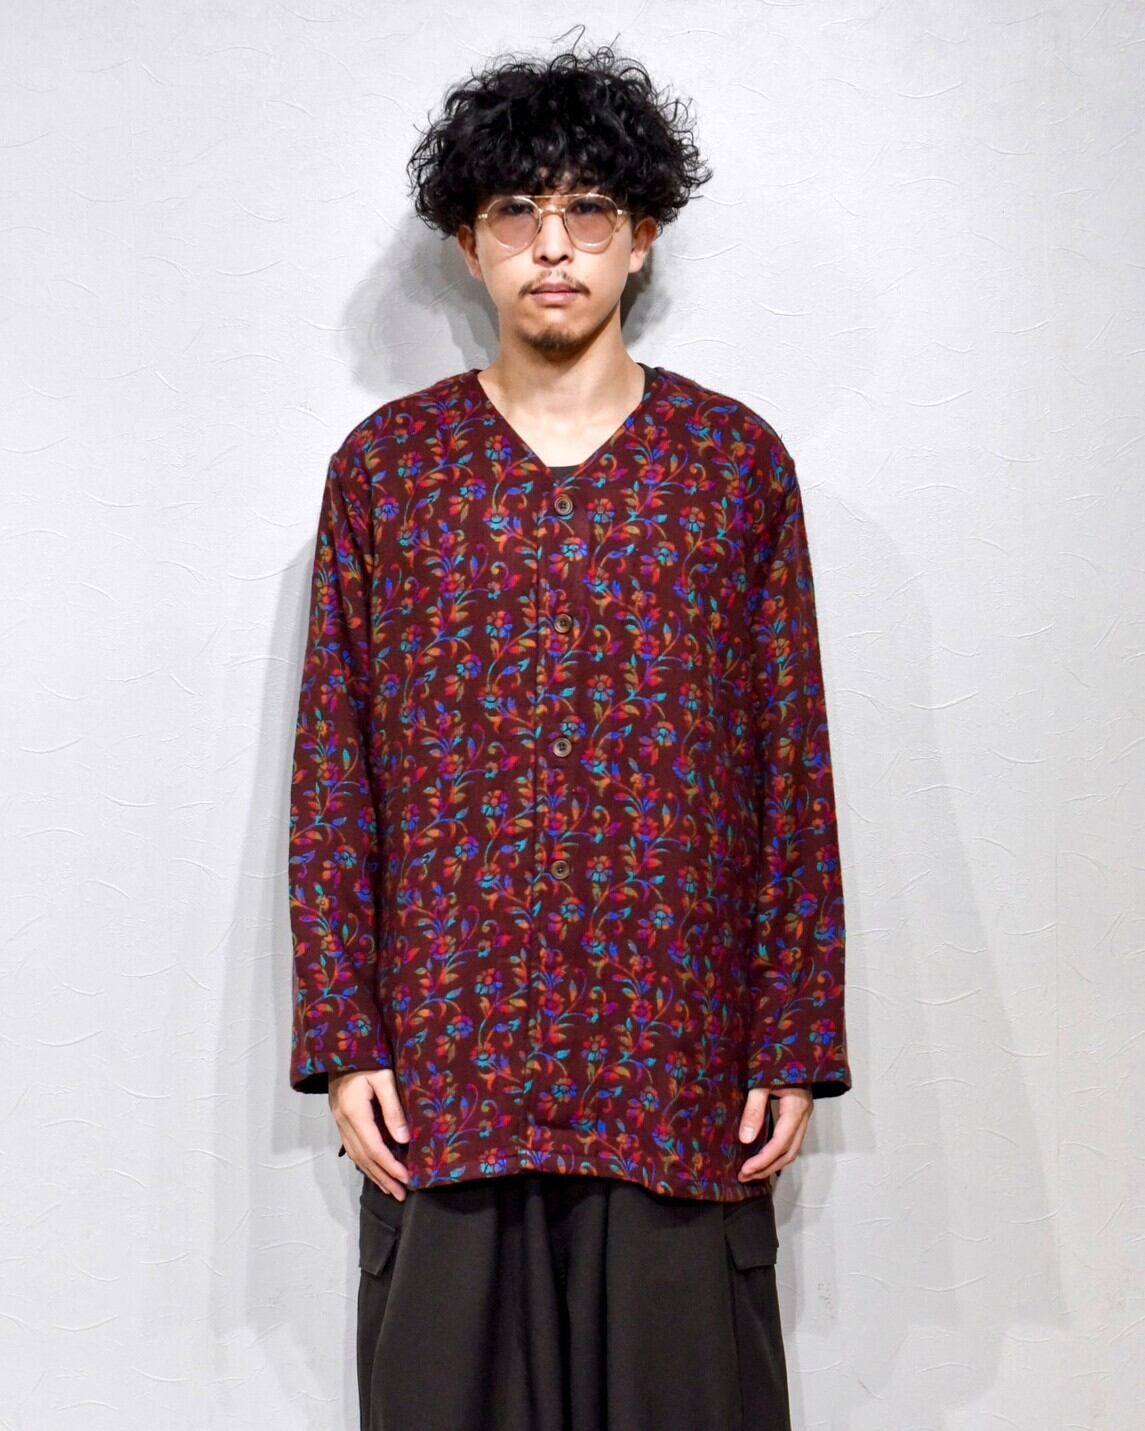 SOUTH2 WEST8 - Flower Pattern No Collar Jacket (size-XS) ¥16000+tax |  Kodona Online Store powered by BASE